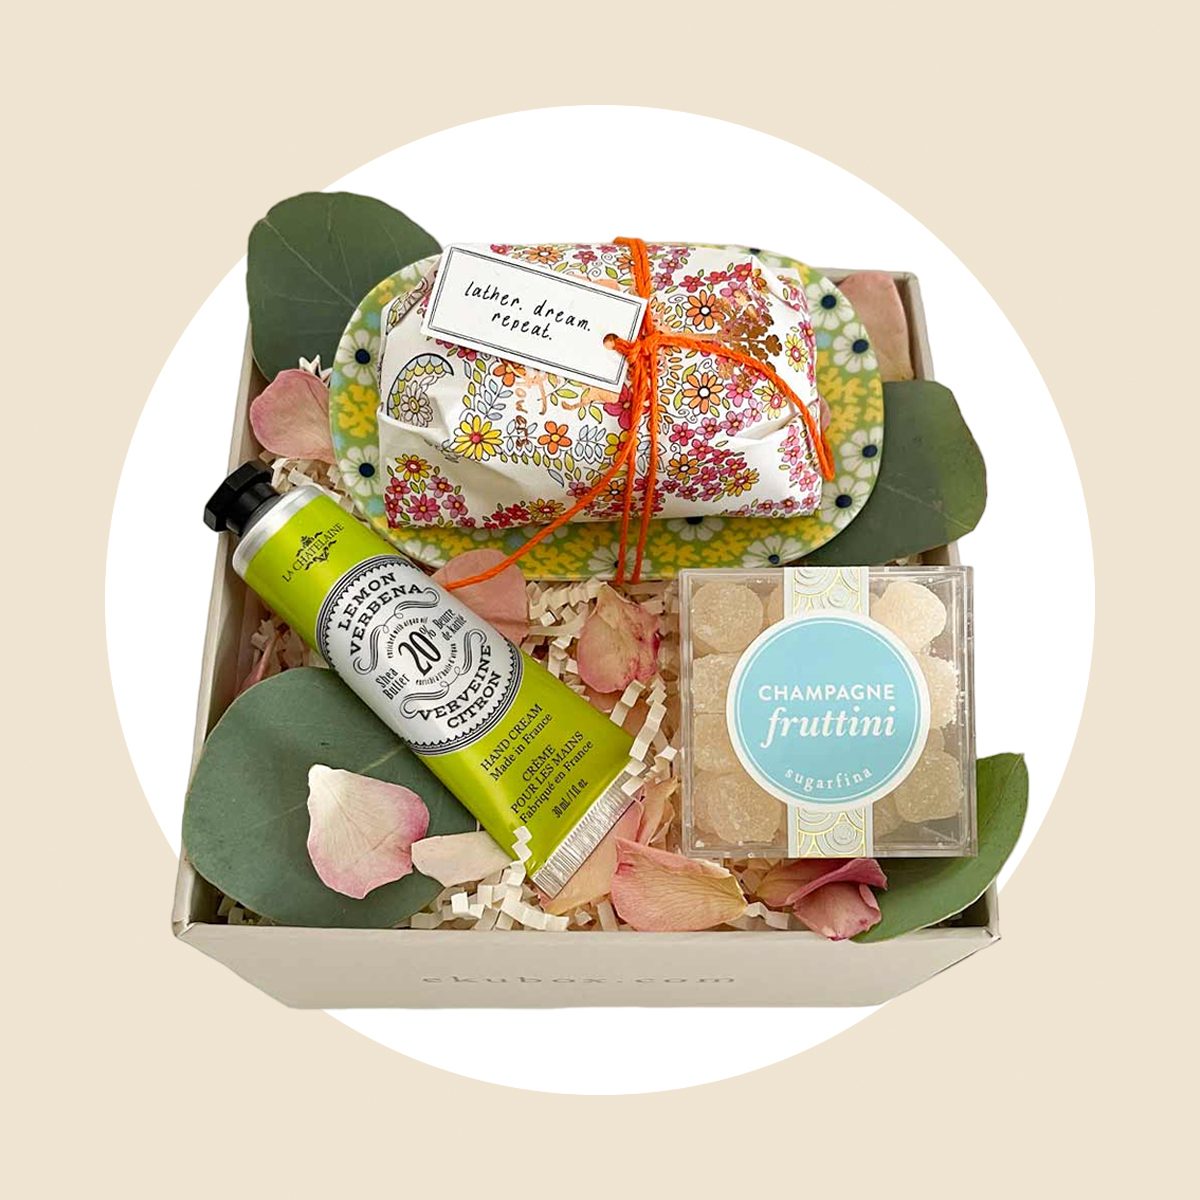 Self-Care Boxes & Mental Health Kits: Cozy, Comforting Gifts